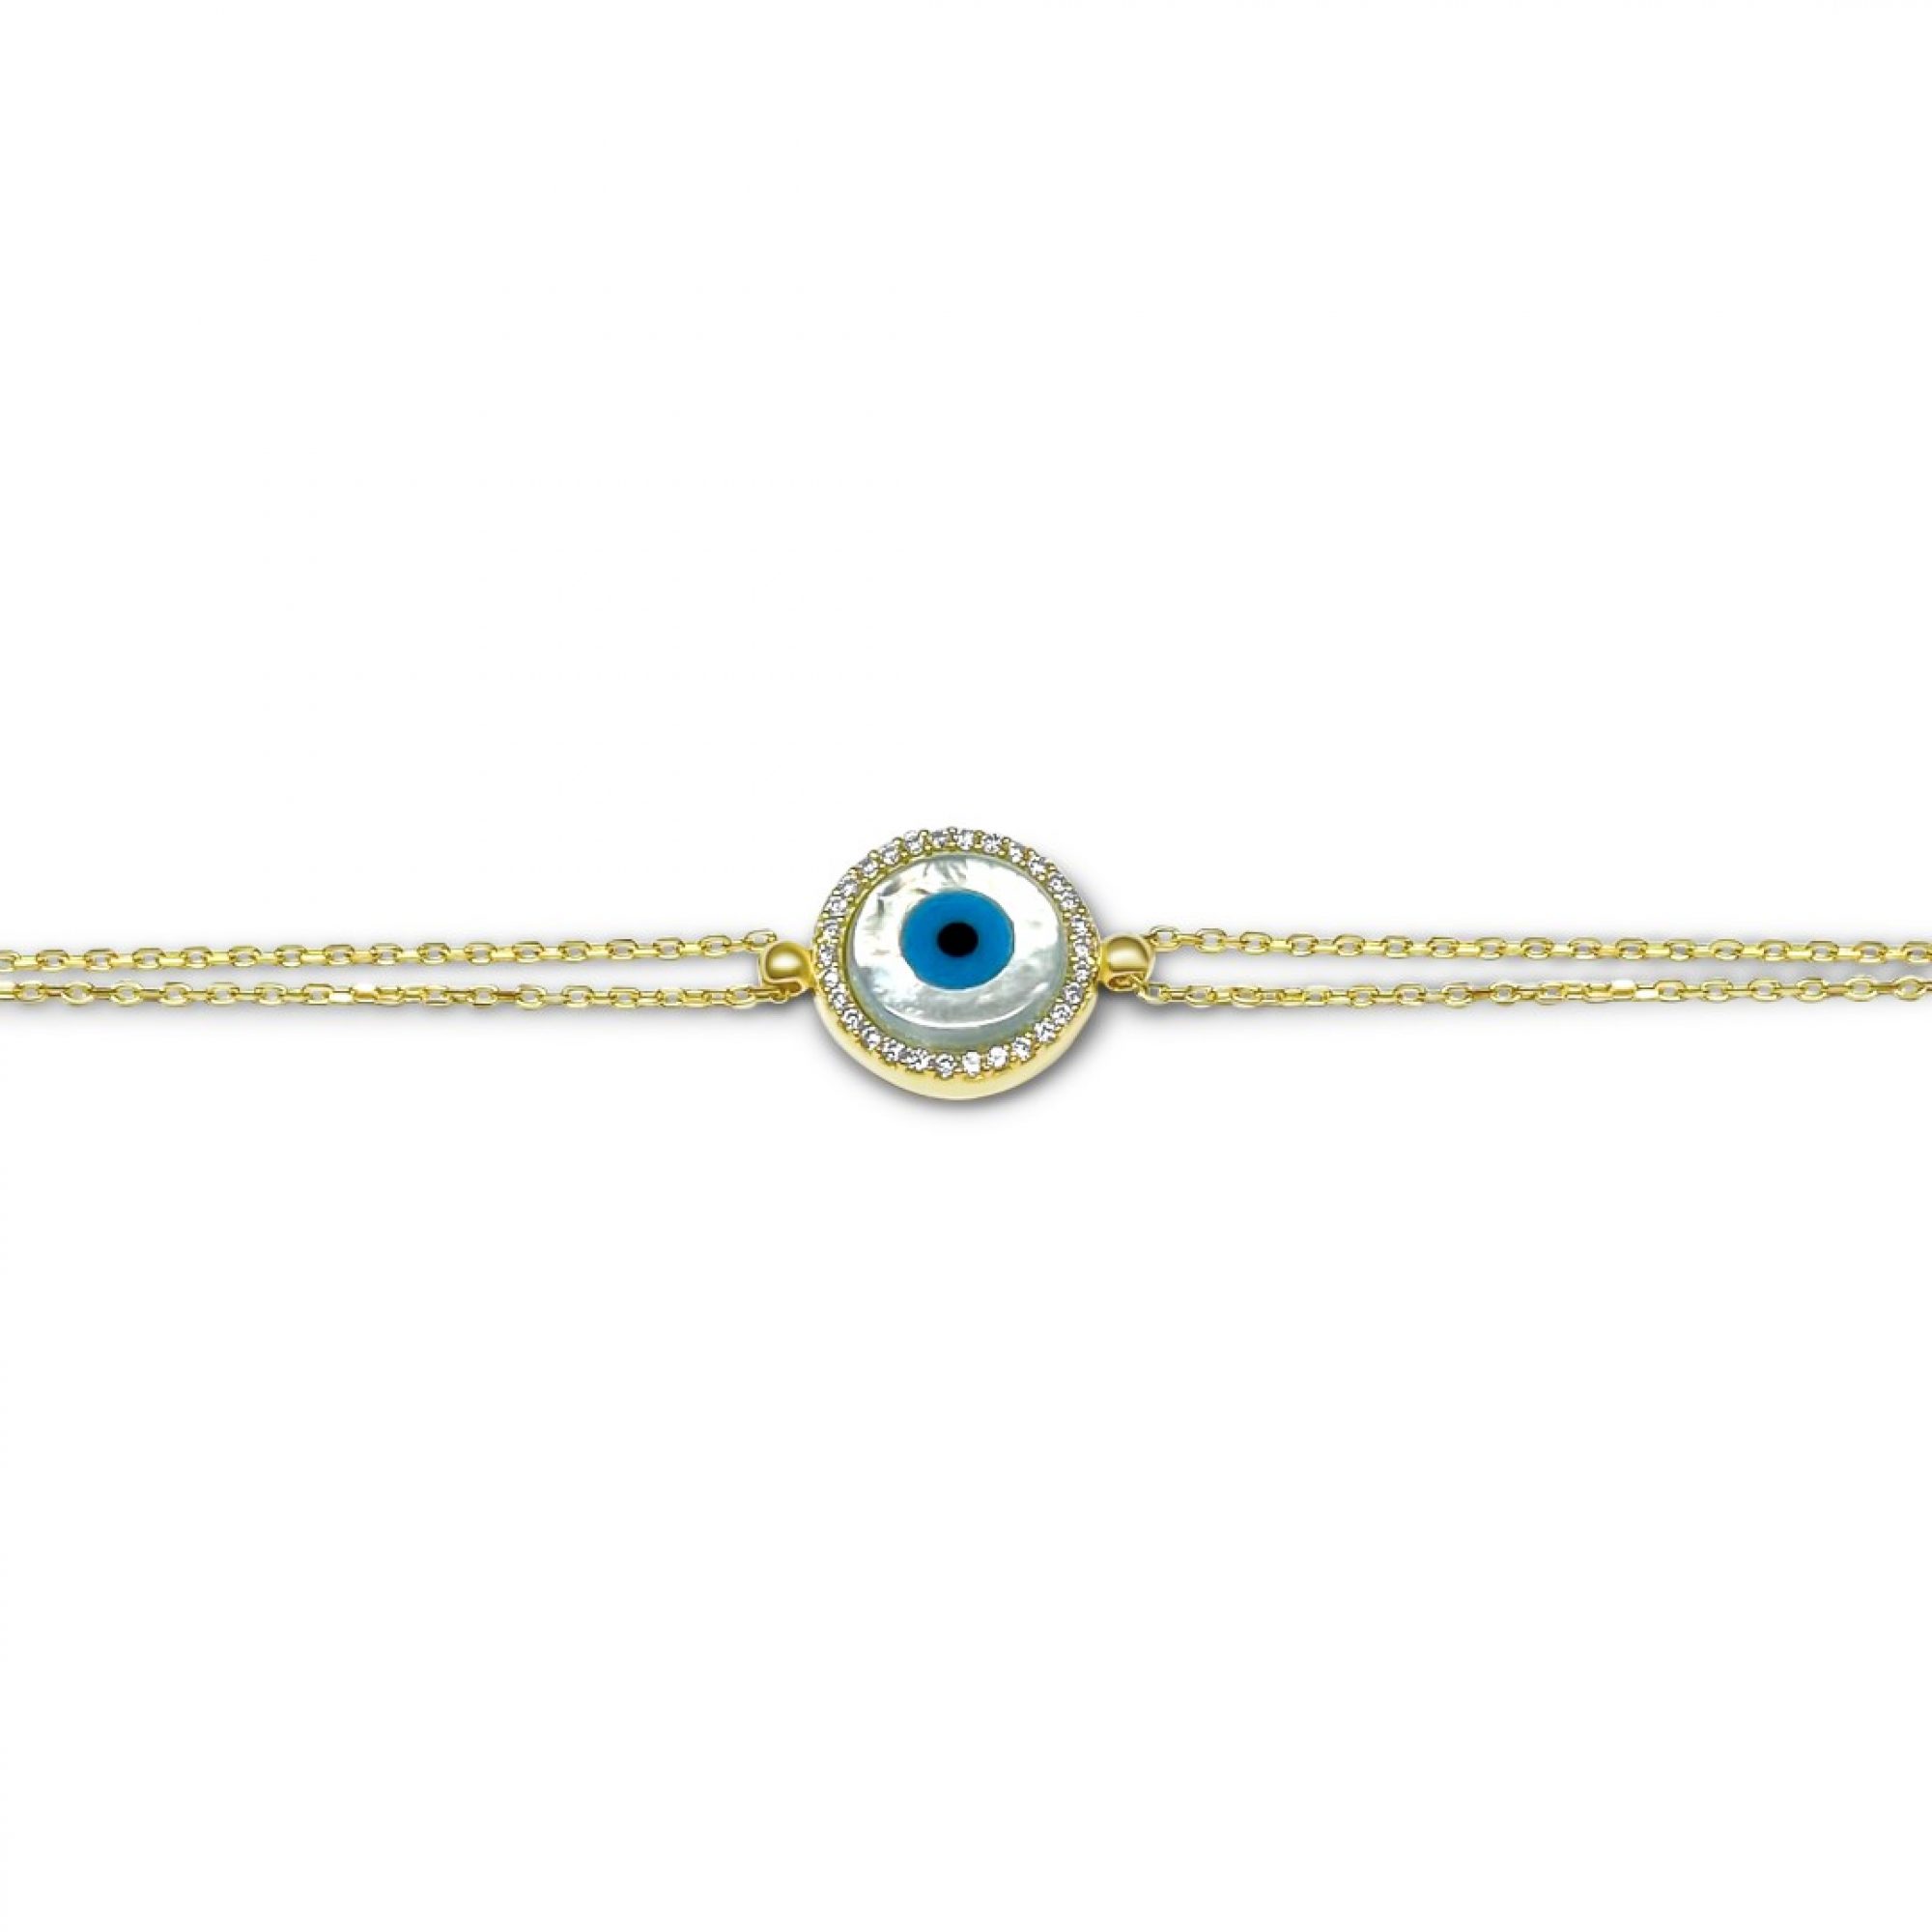 Gold plated eye bracelet with mother of pearl and zircon stones